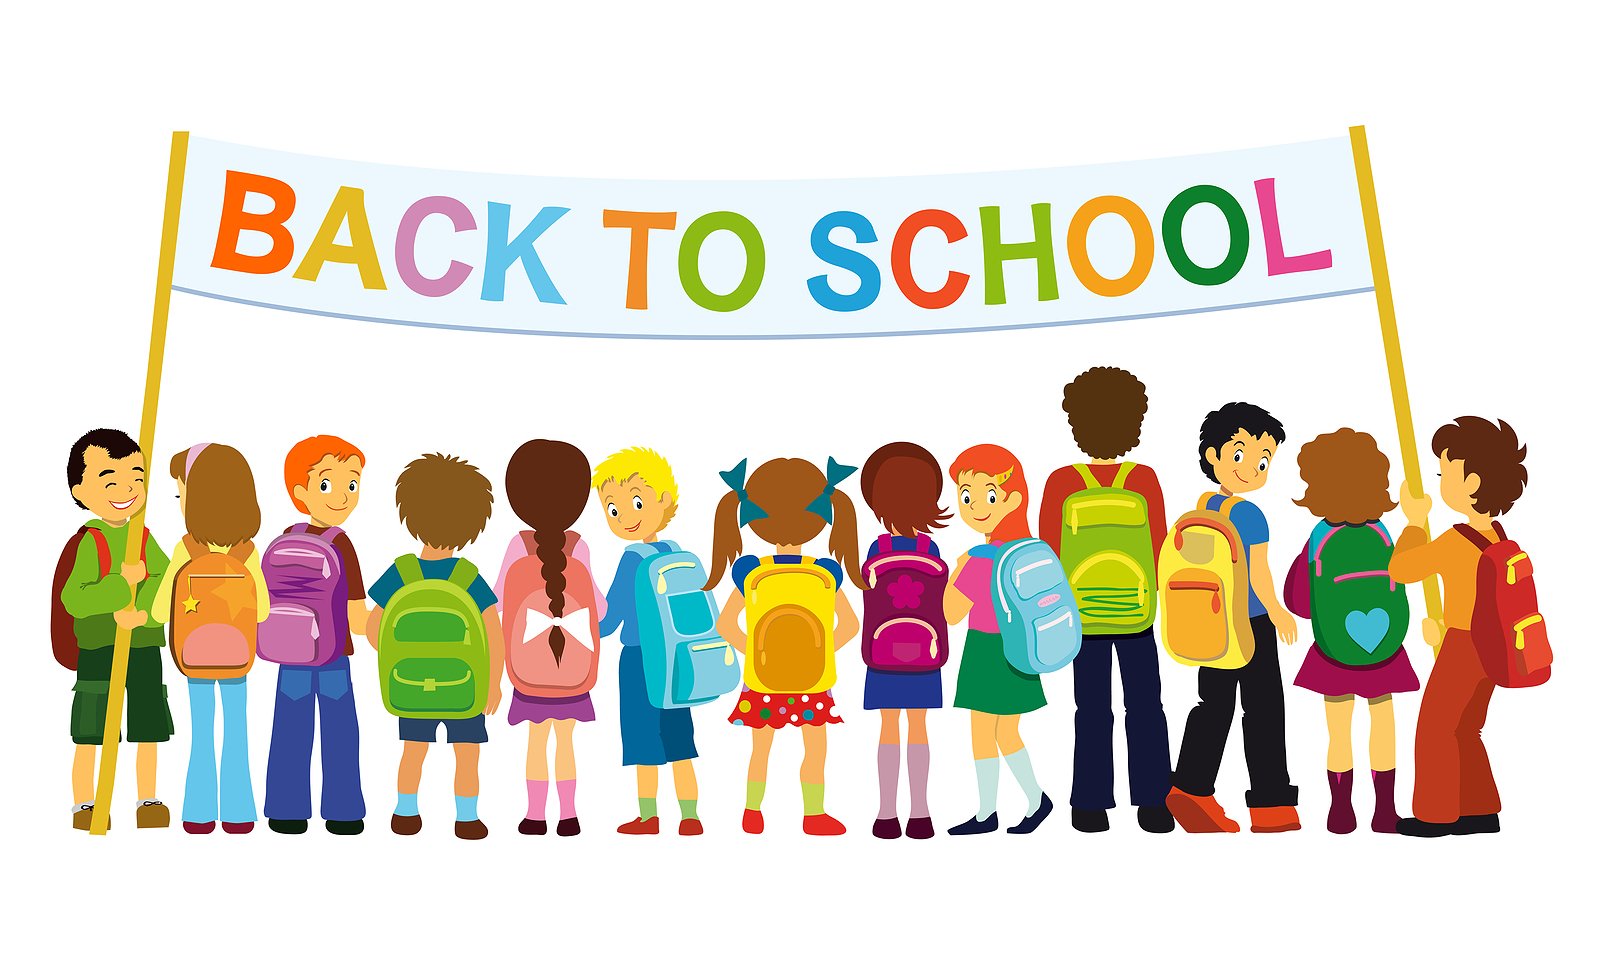 Back to school clipart 2